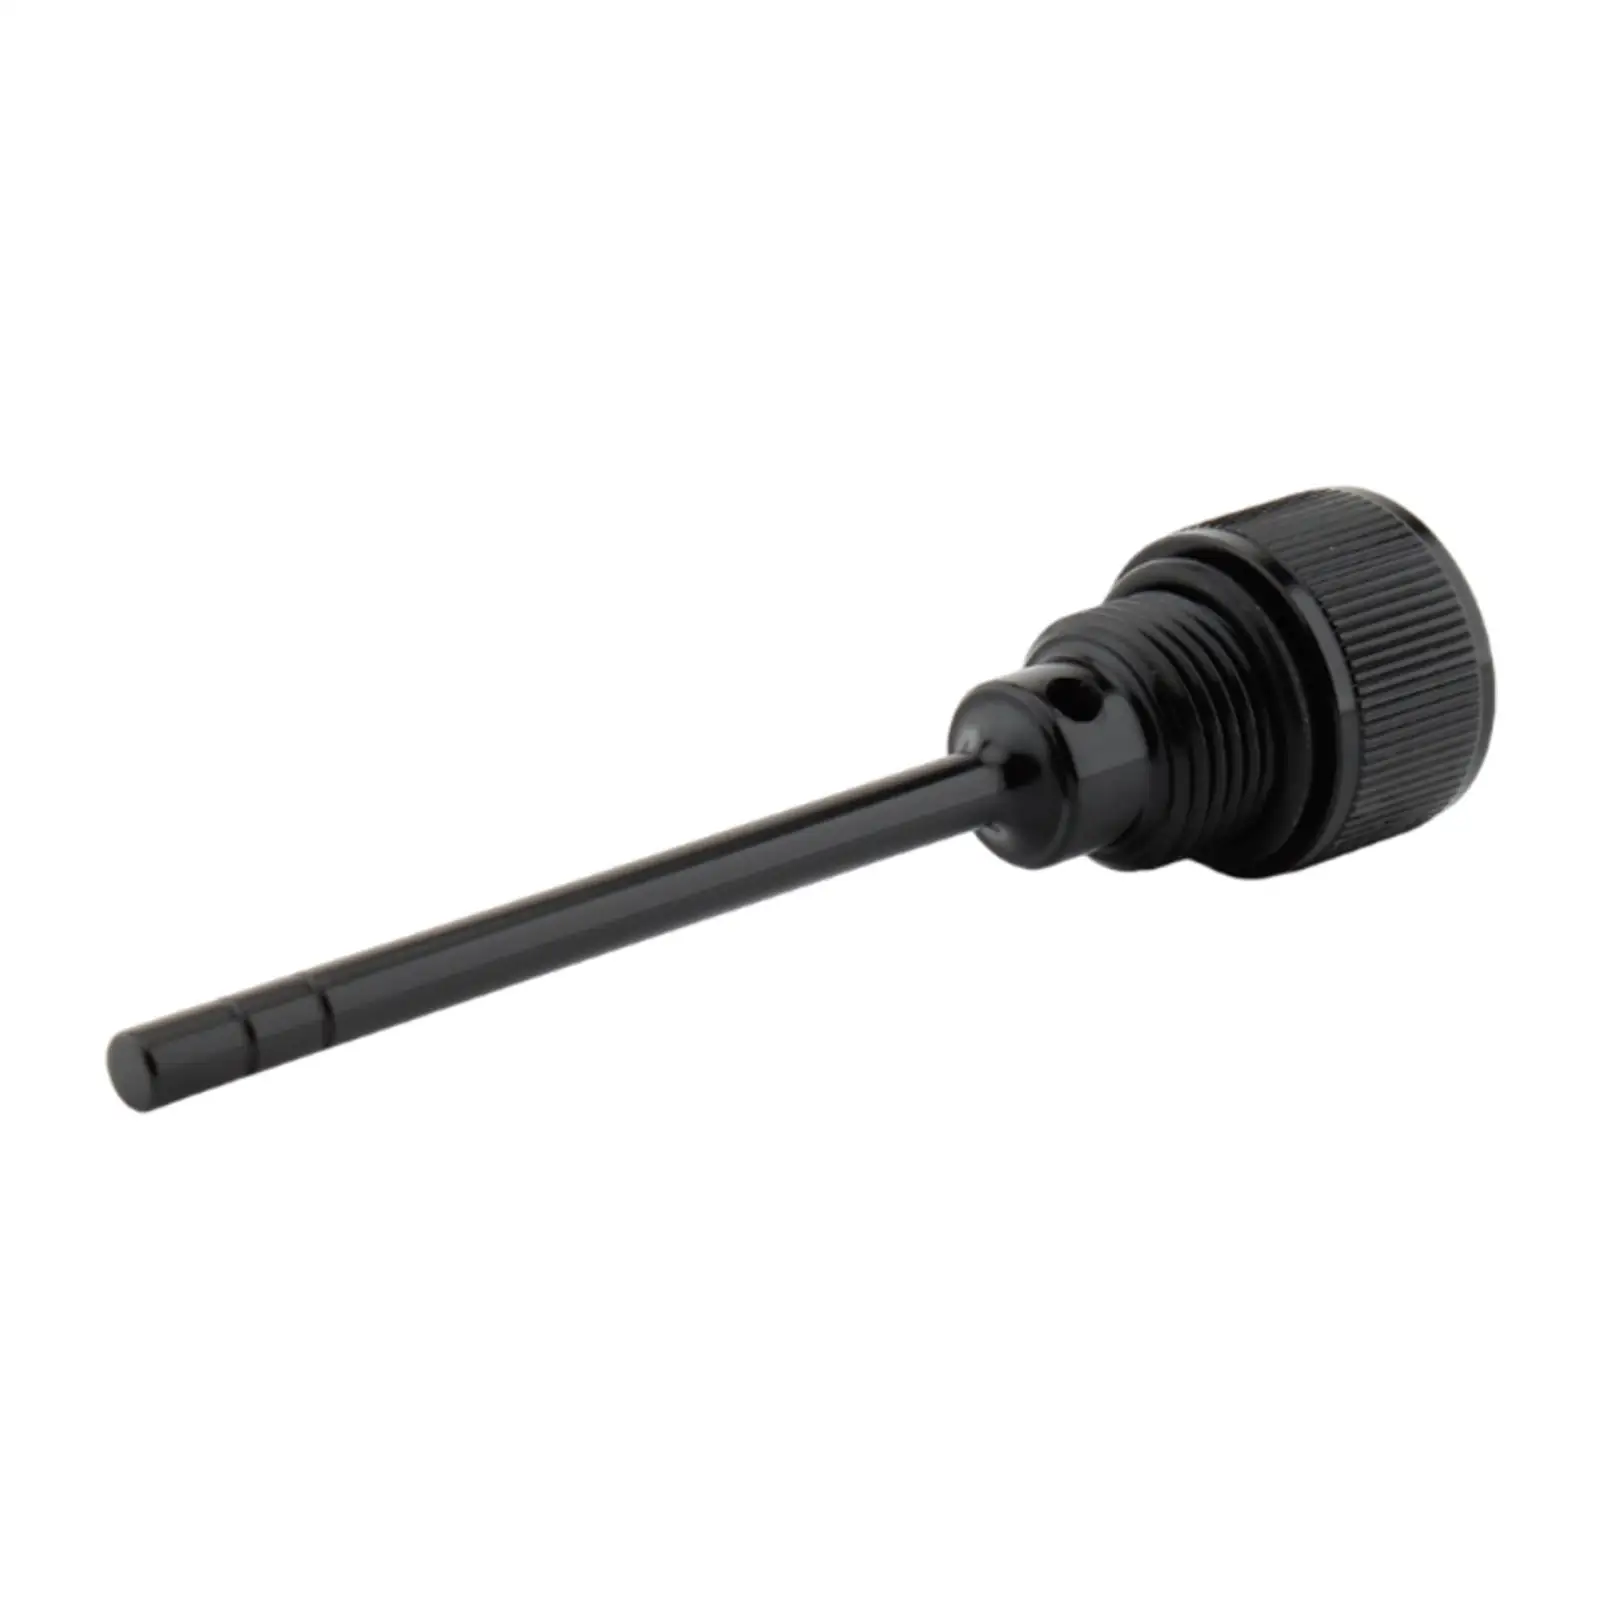 Transmission Oil Fill Plug Dipstick Durable Accessory for Fxs Flstfbs